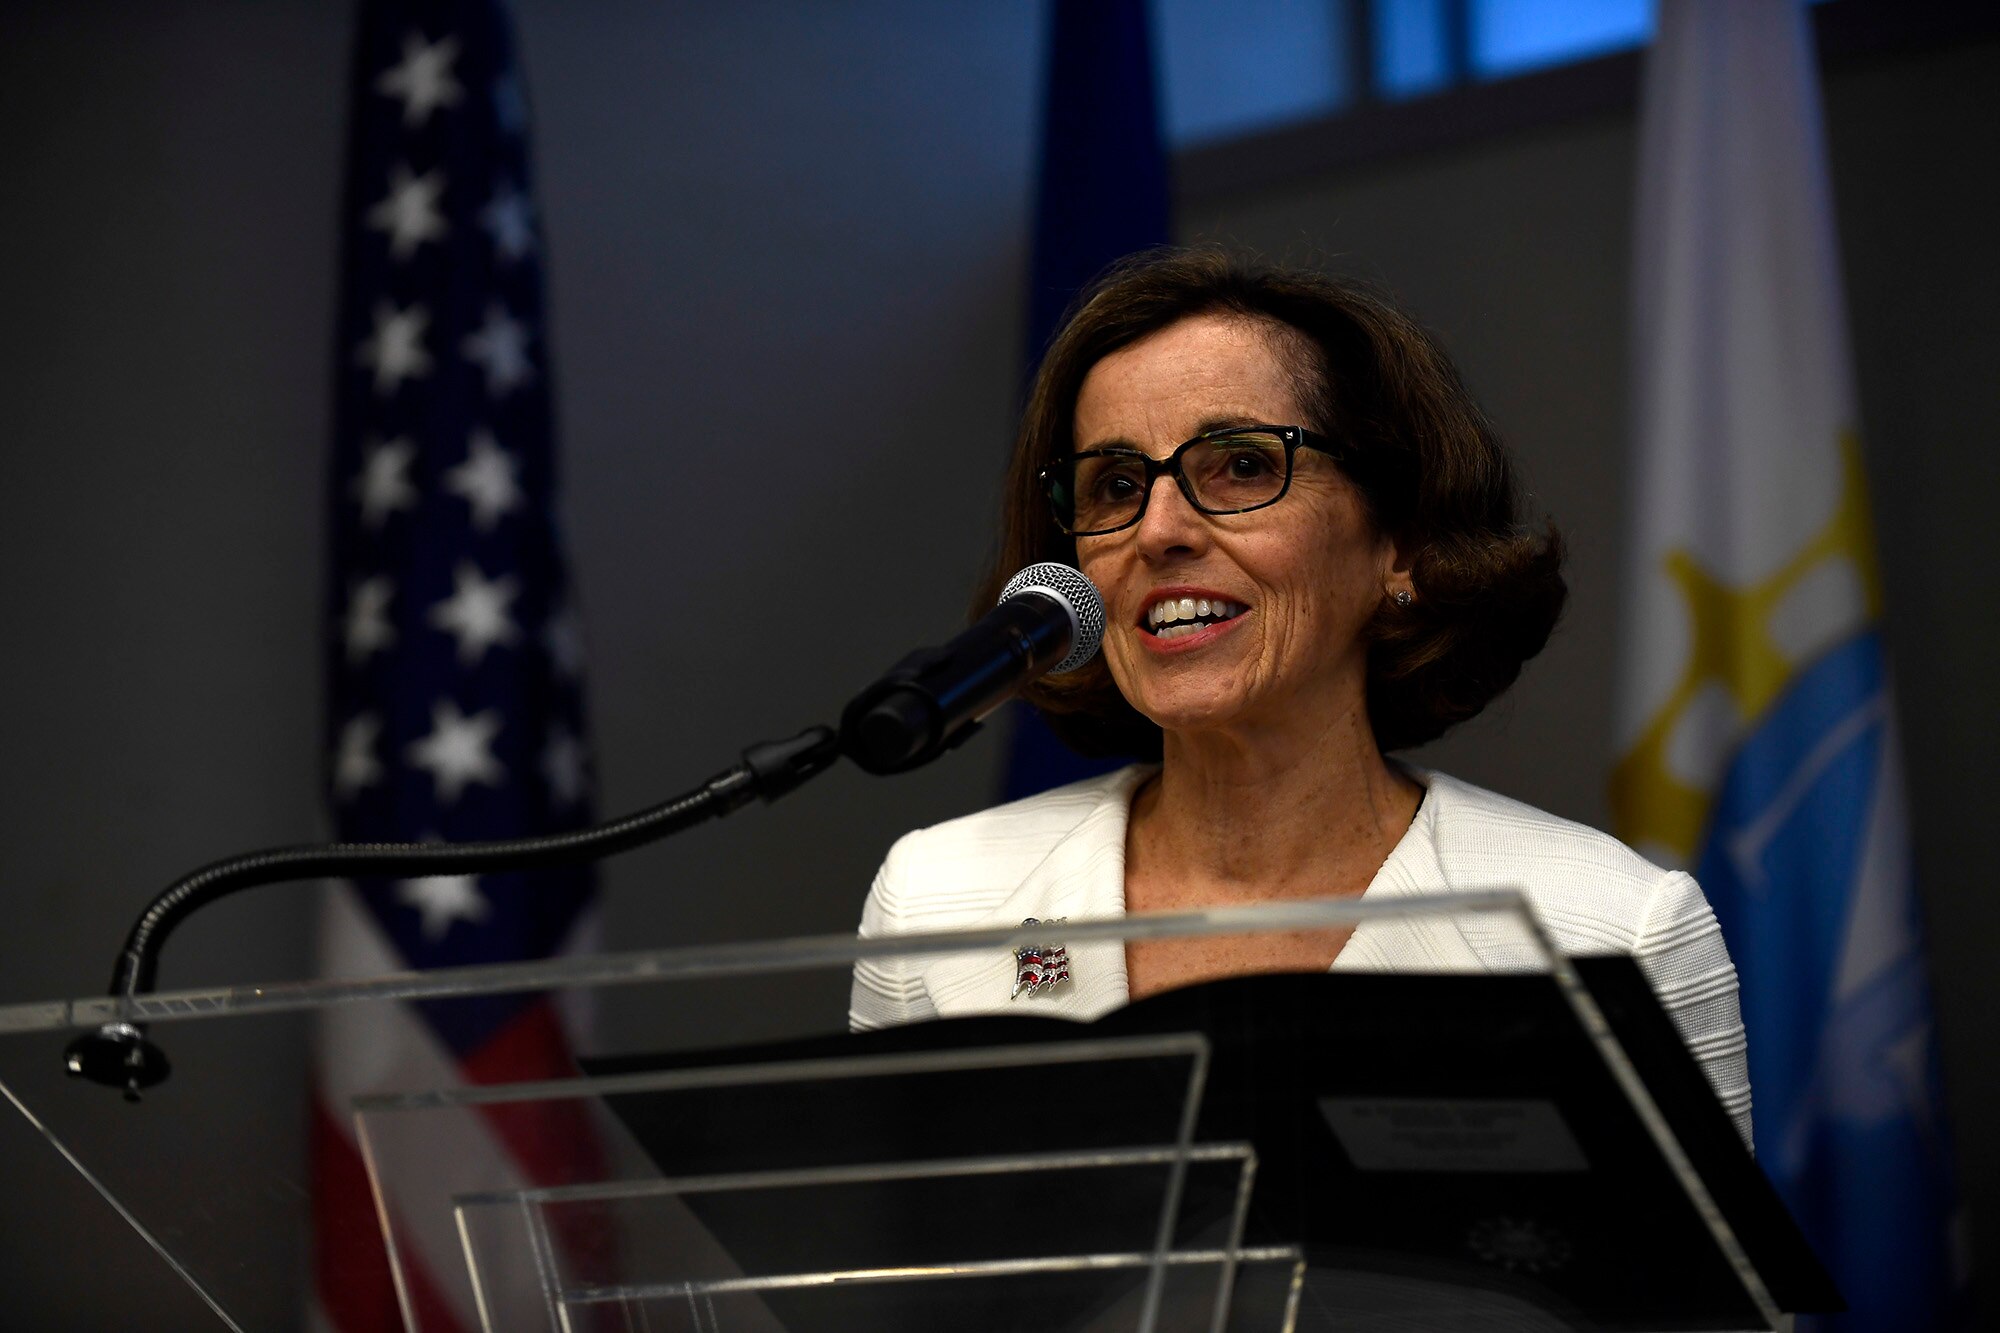 National Science Foundation Director France Córdova speaks prior to signing a letter of intent with the National Science Foundation in Washington, D.C., May 9, 2018. The letter of intent initiates a strategic partnership focused on research in four areas of common interest: space operations and geosciences, advanced material sciences, information and data sciences, and workforce and processes. (U.S. Air Force photo by Staff Sgt. Rusty Frank)